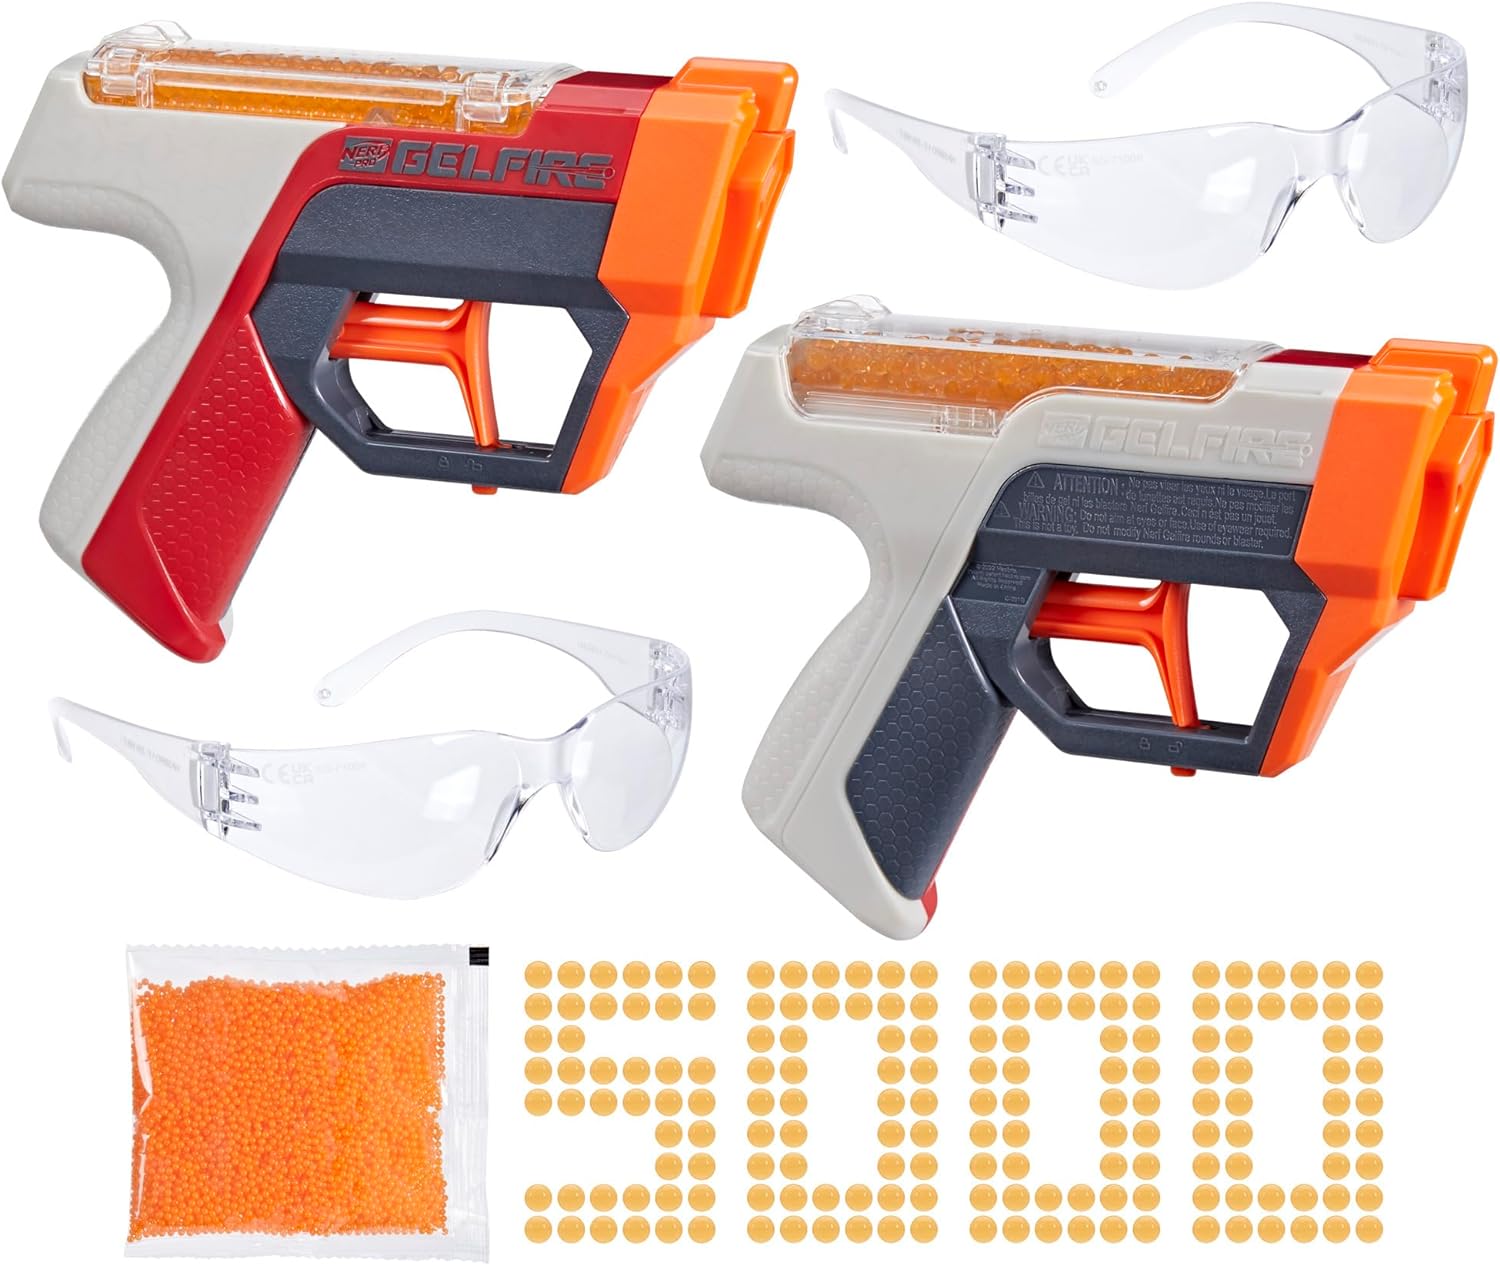 Nerf Pro Gelfire Dual Wield Pack w/ 5000 Rounds, 2X 100-Round Hopper & 2 Protective Eyewear  $7.49 + Free Shipping w/ Prime or on orders over $35